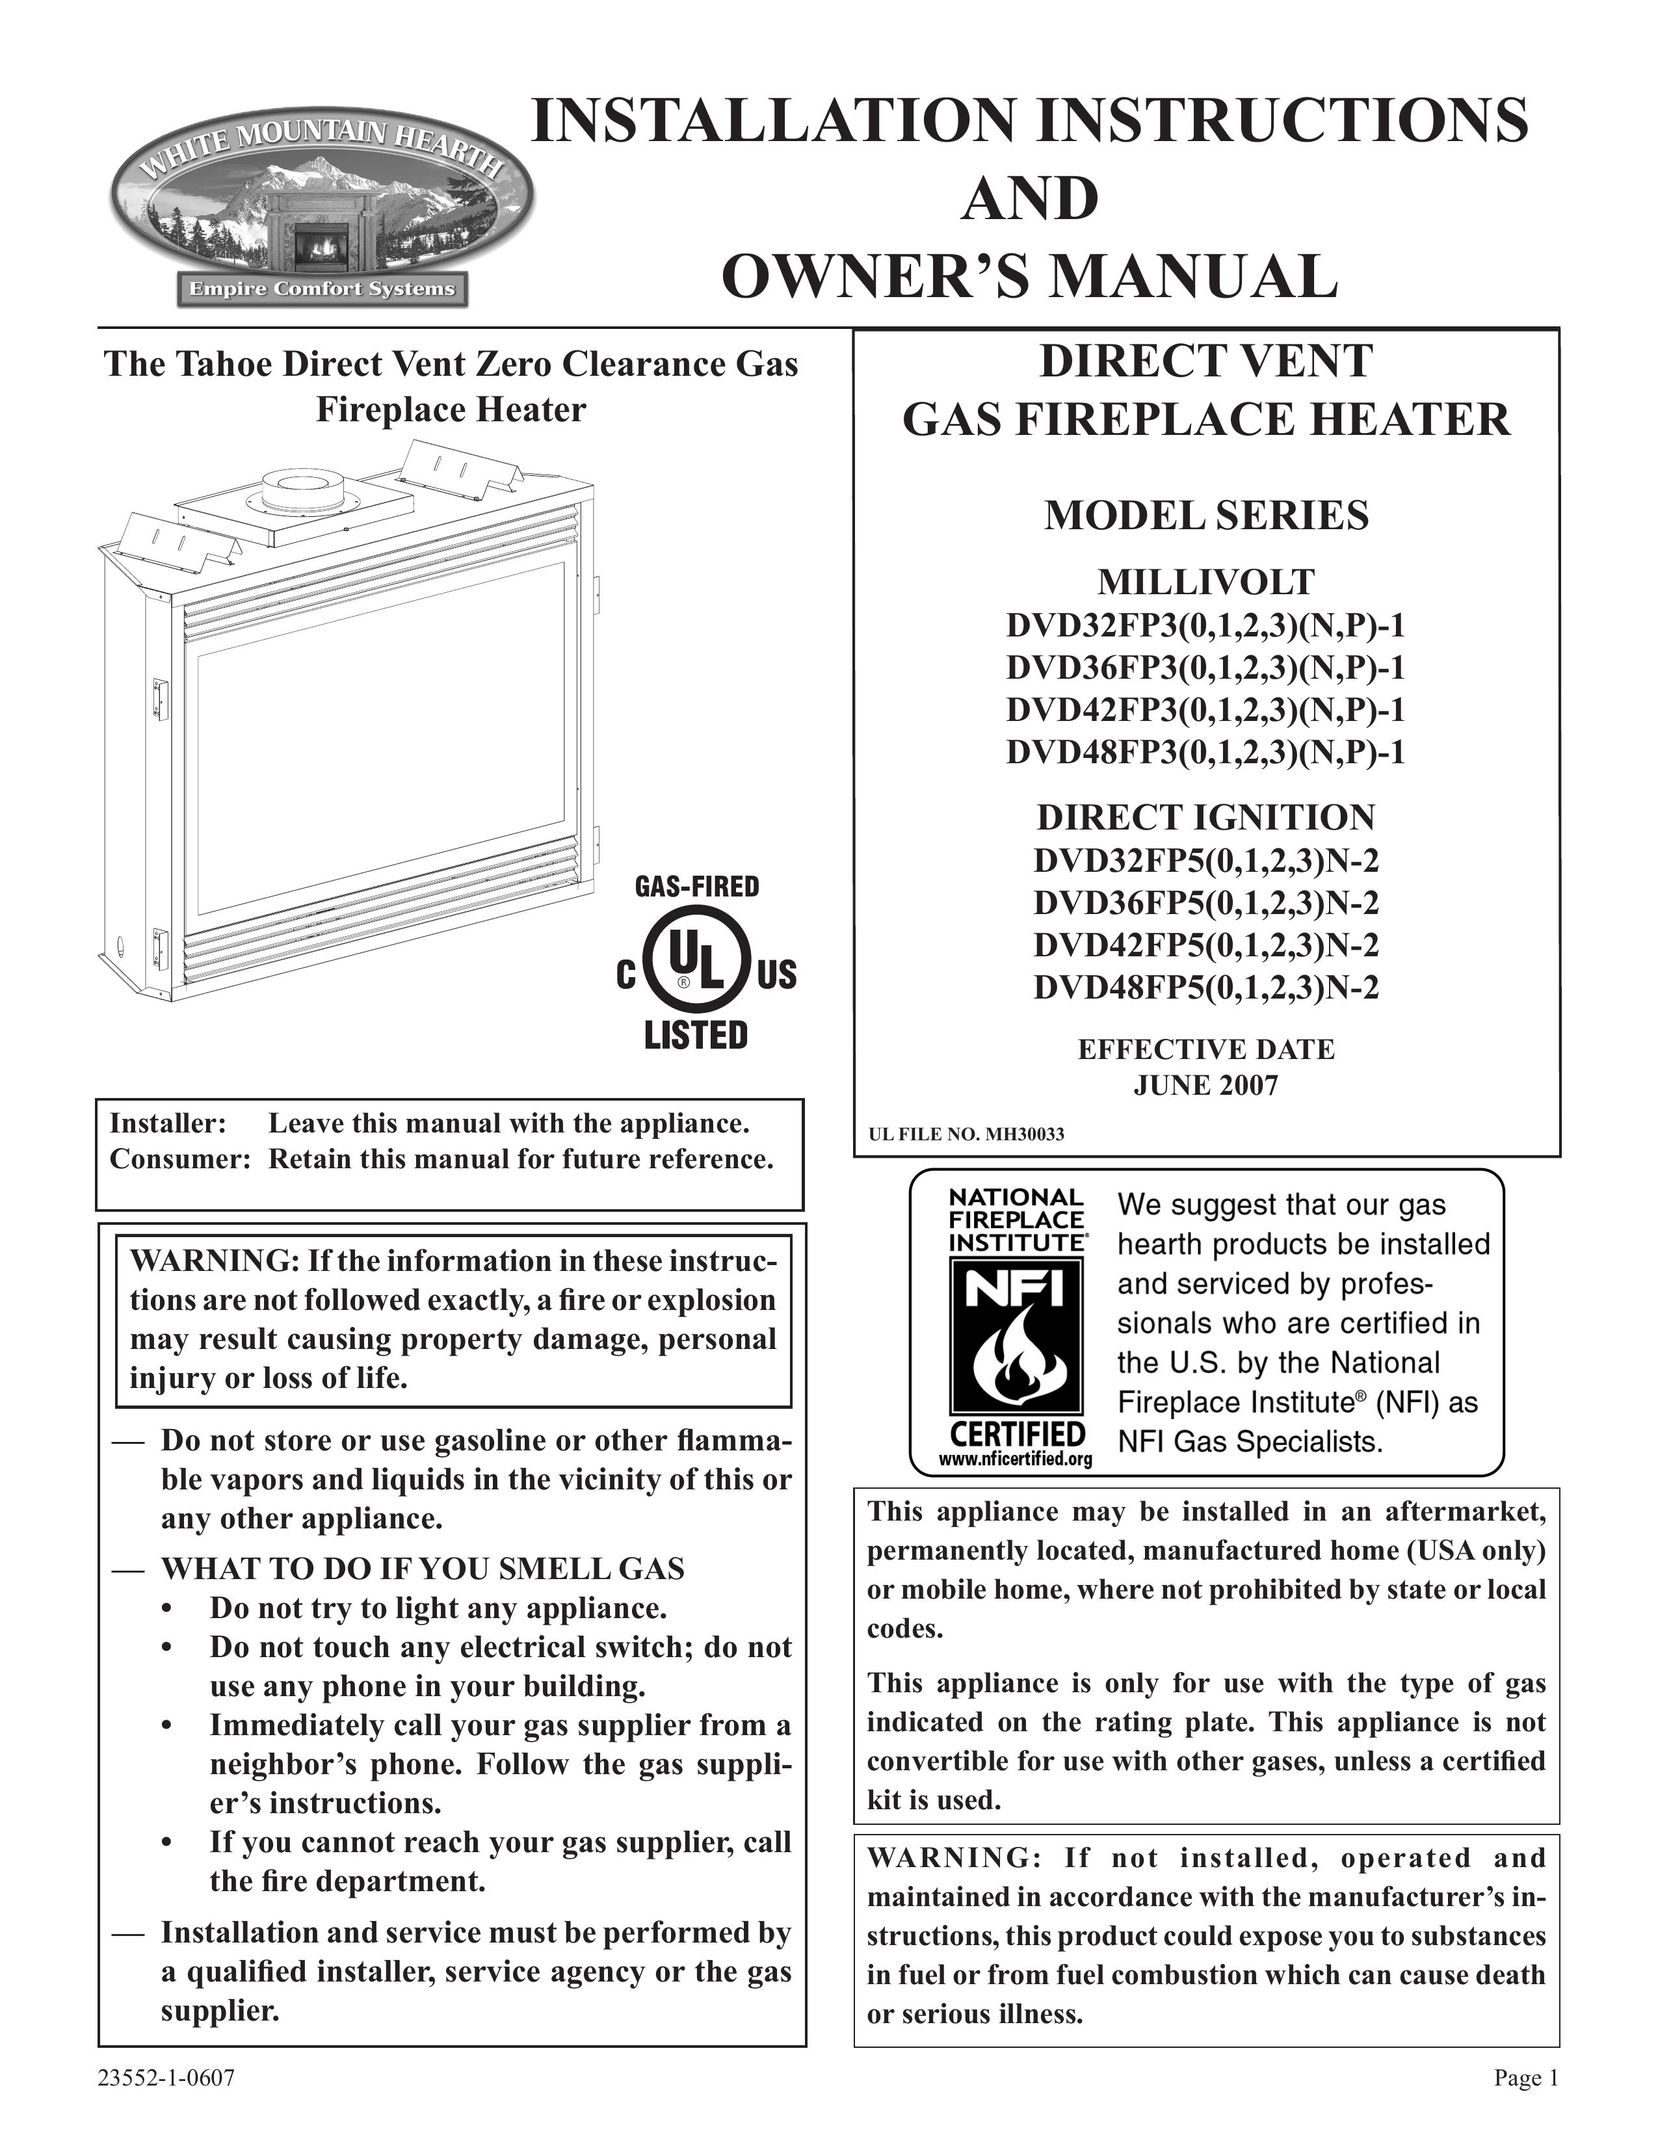 Empire Comfort Systems DVD42FP3 Indoor Fireplace User Manual